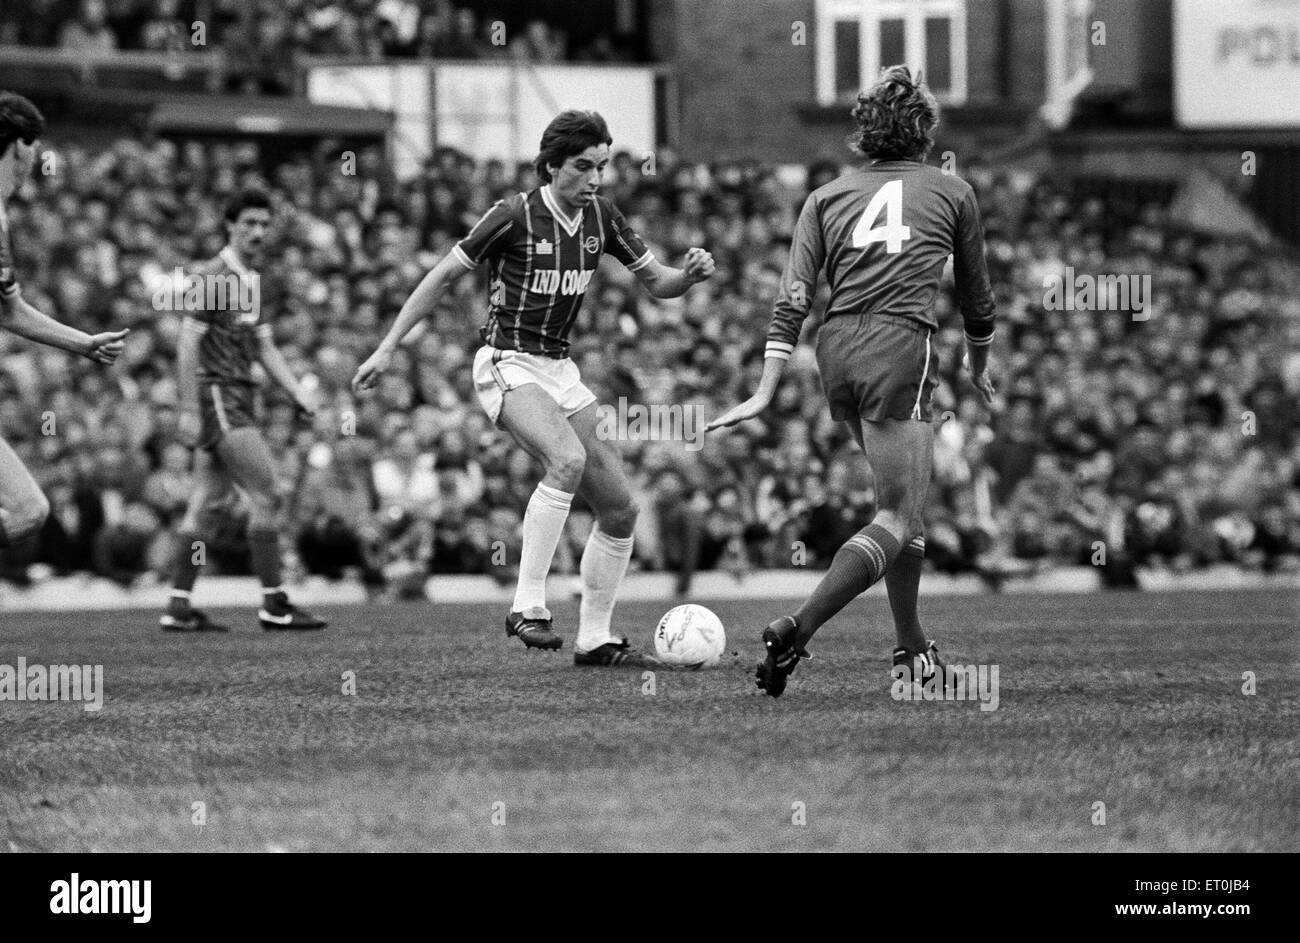 English League Division One match at  Filbert Street. Leicester City 0 v Liverpool 1.  Leicester's  Alan Smith on the ball.   6th April 1985. Stock Photo